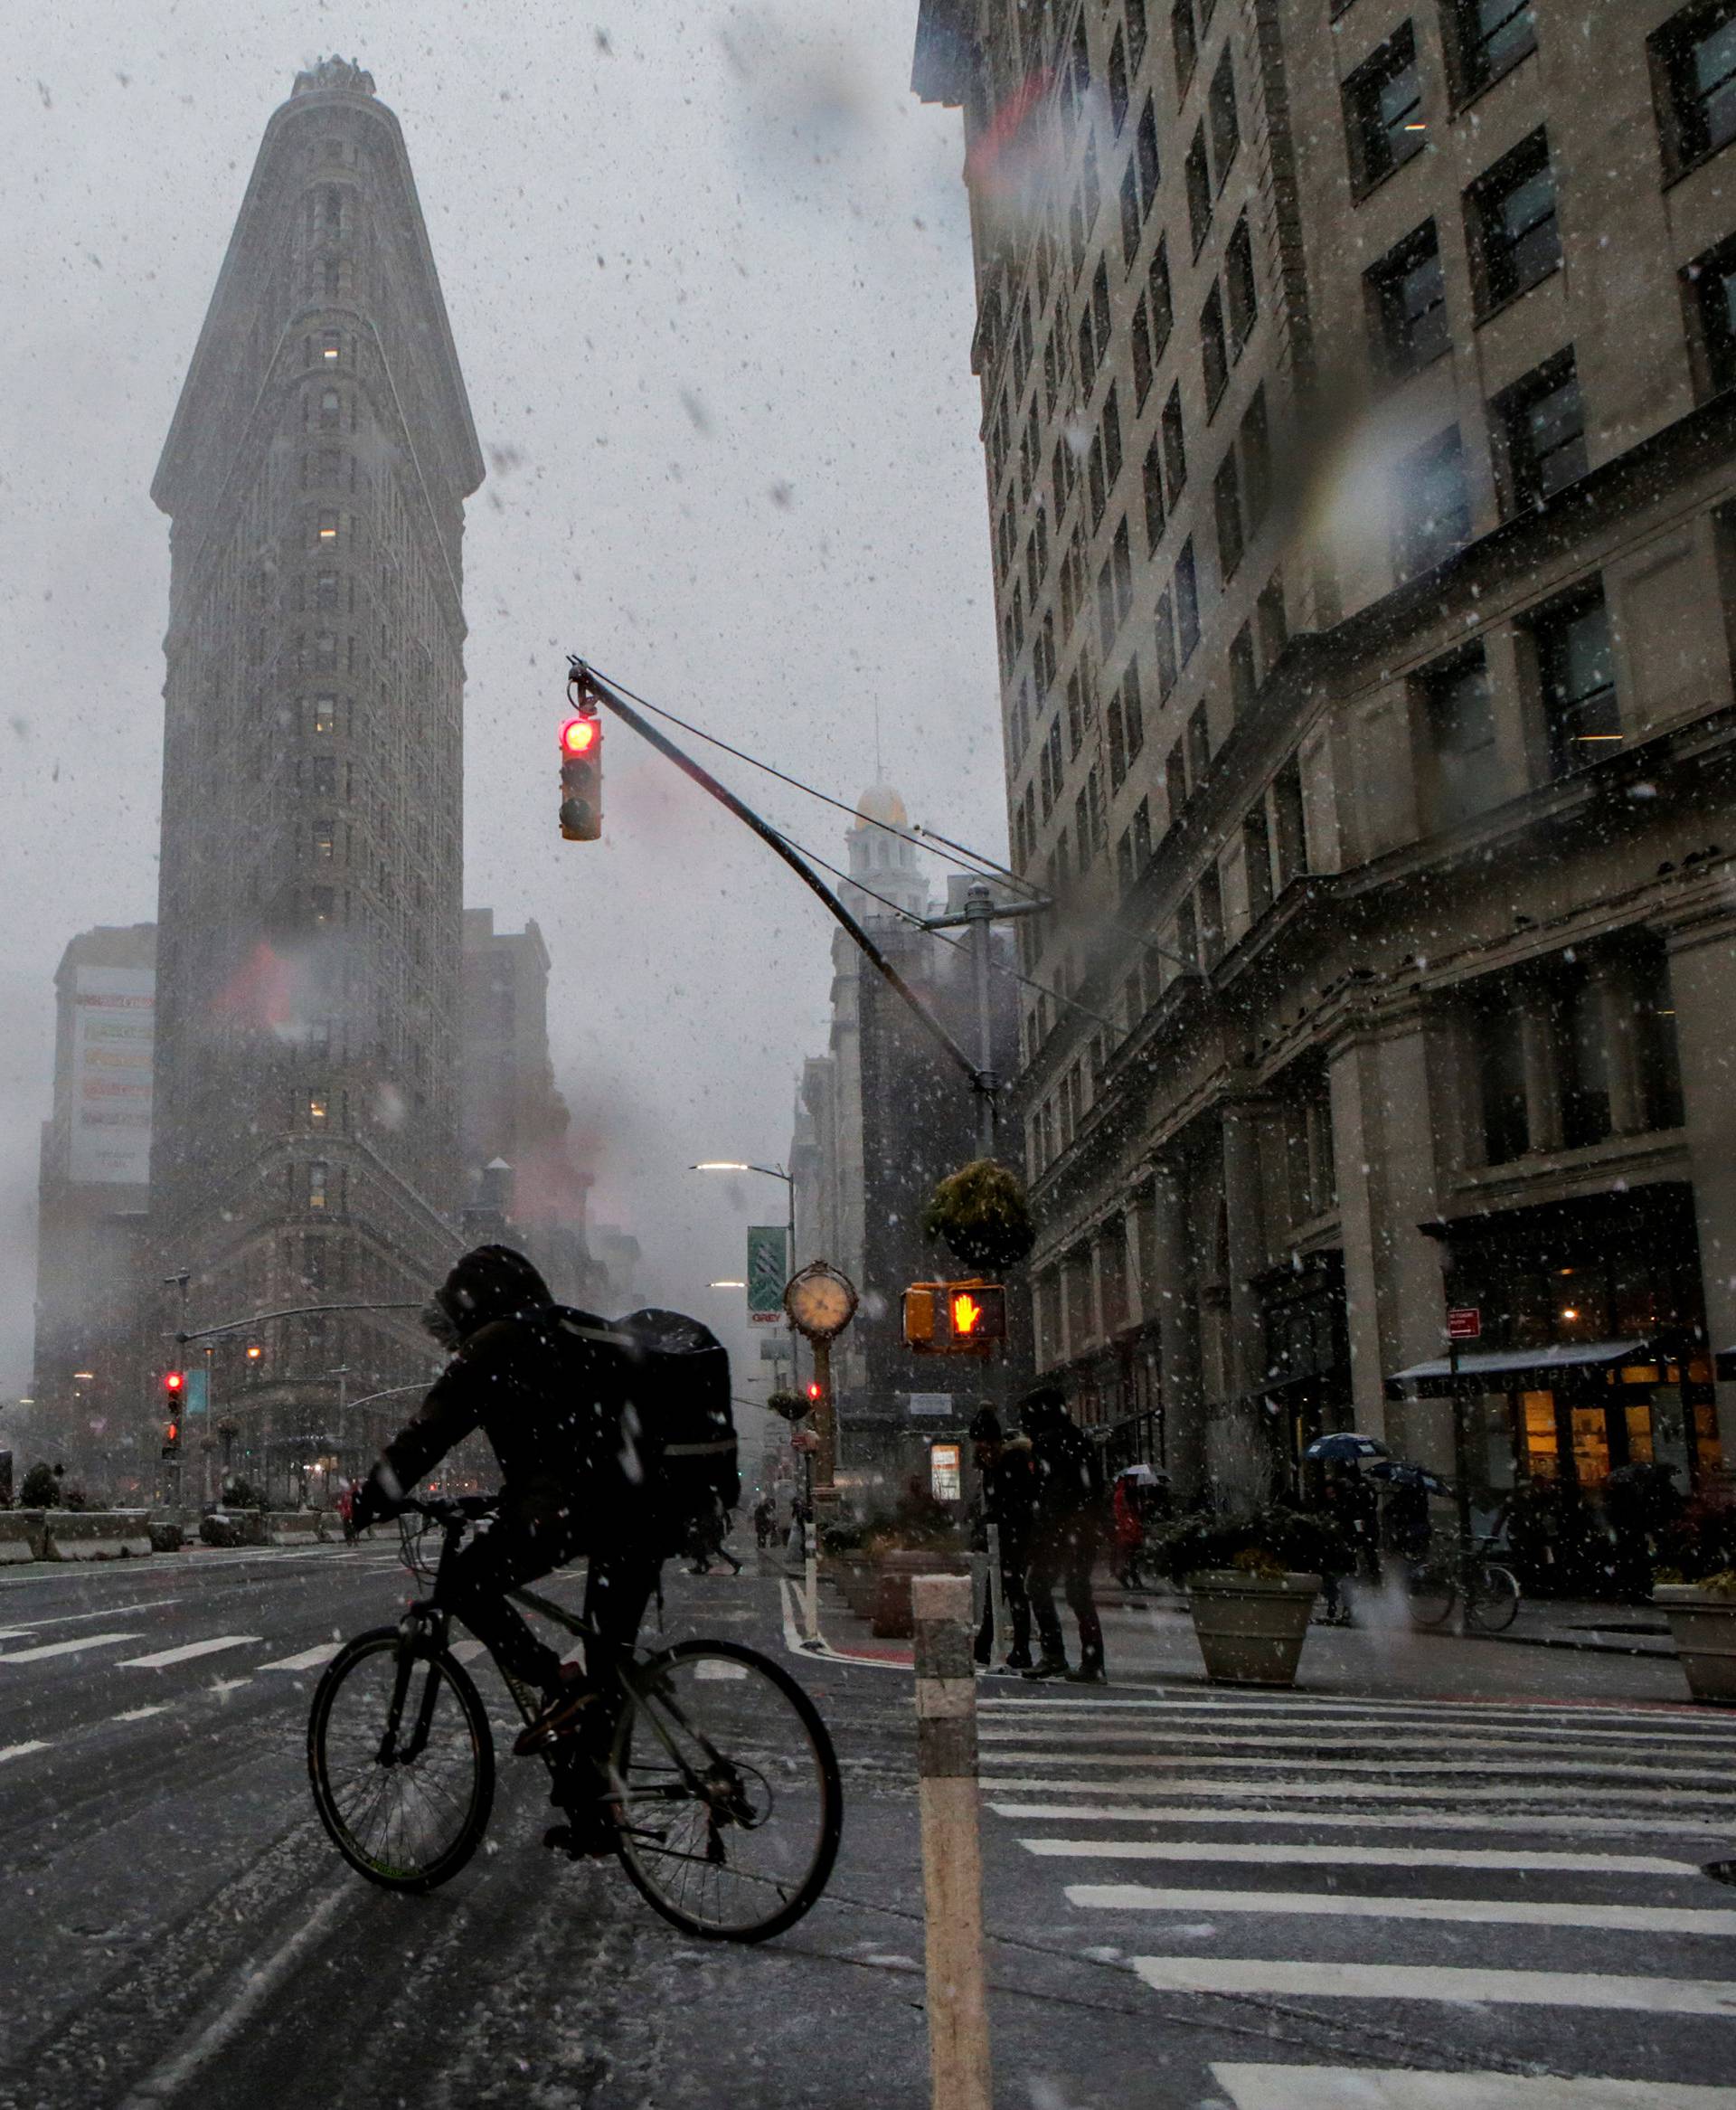 A man rides his bike near the Flatiron Building during a snowstorm in New York City, New York